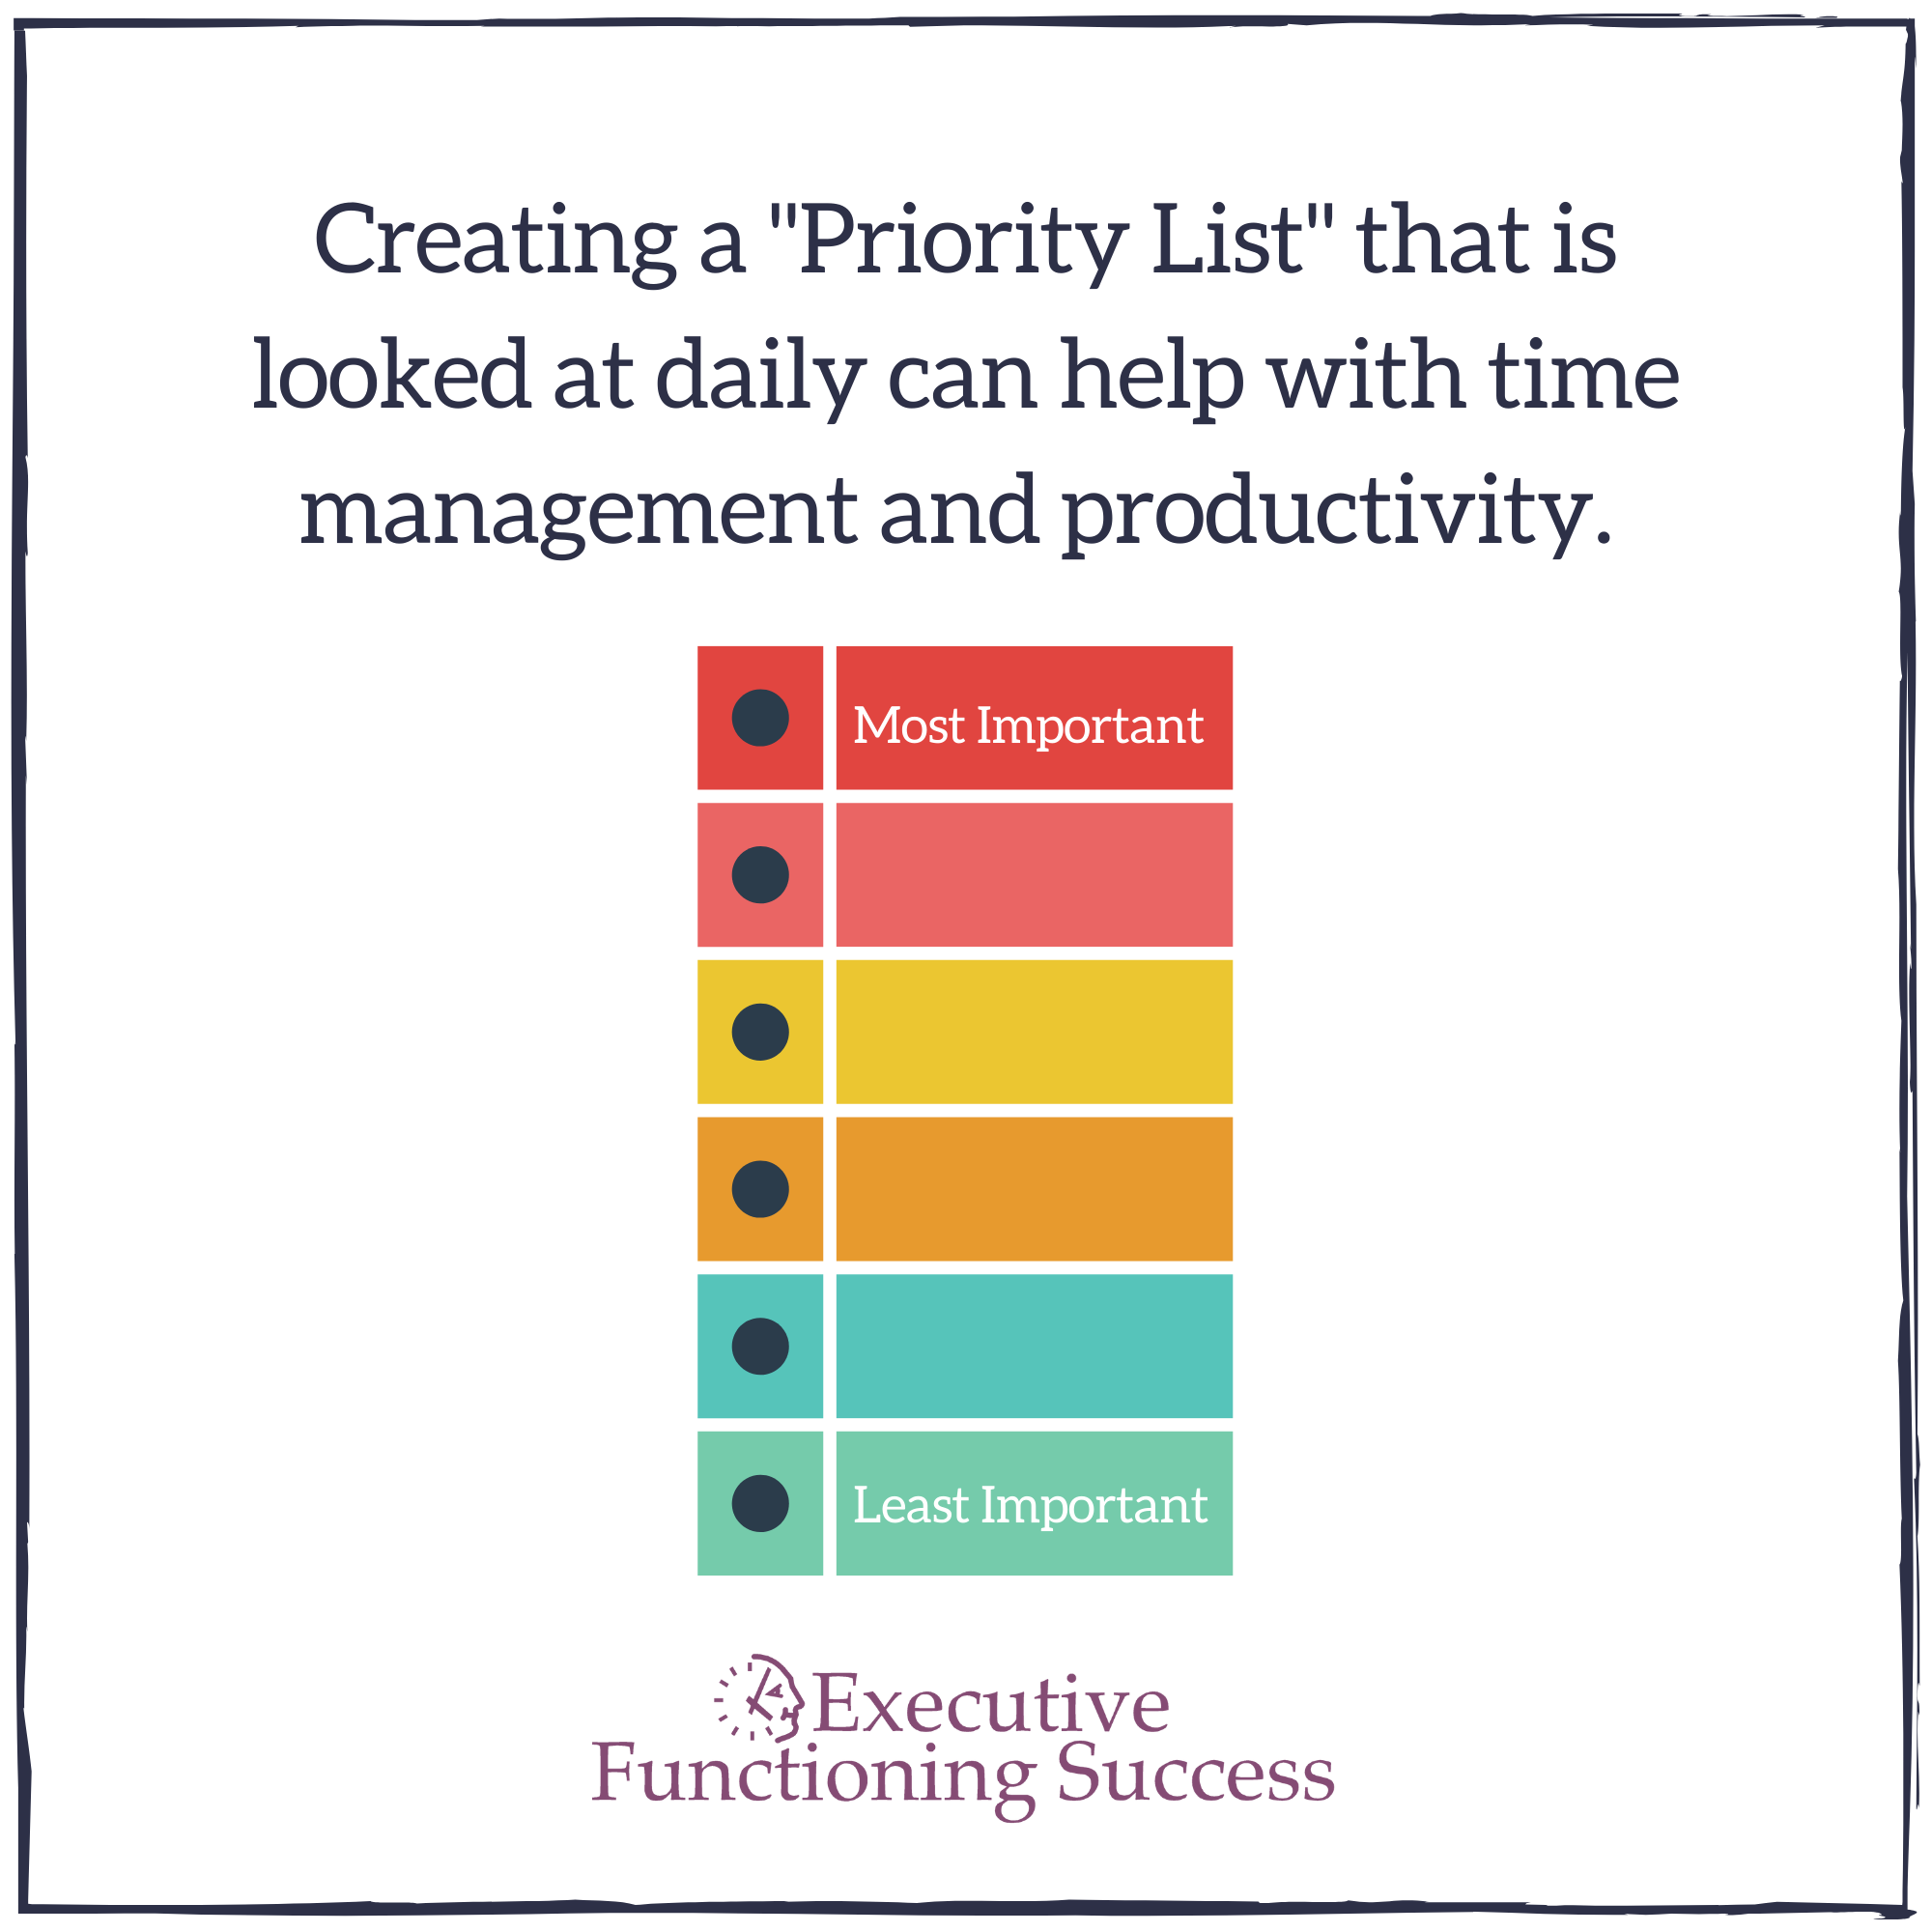 social media graphic visual example of creating a priority list for time management and productivity to market executive functioning success 